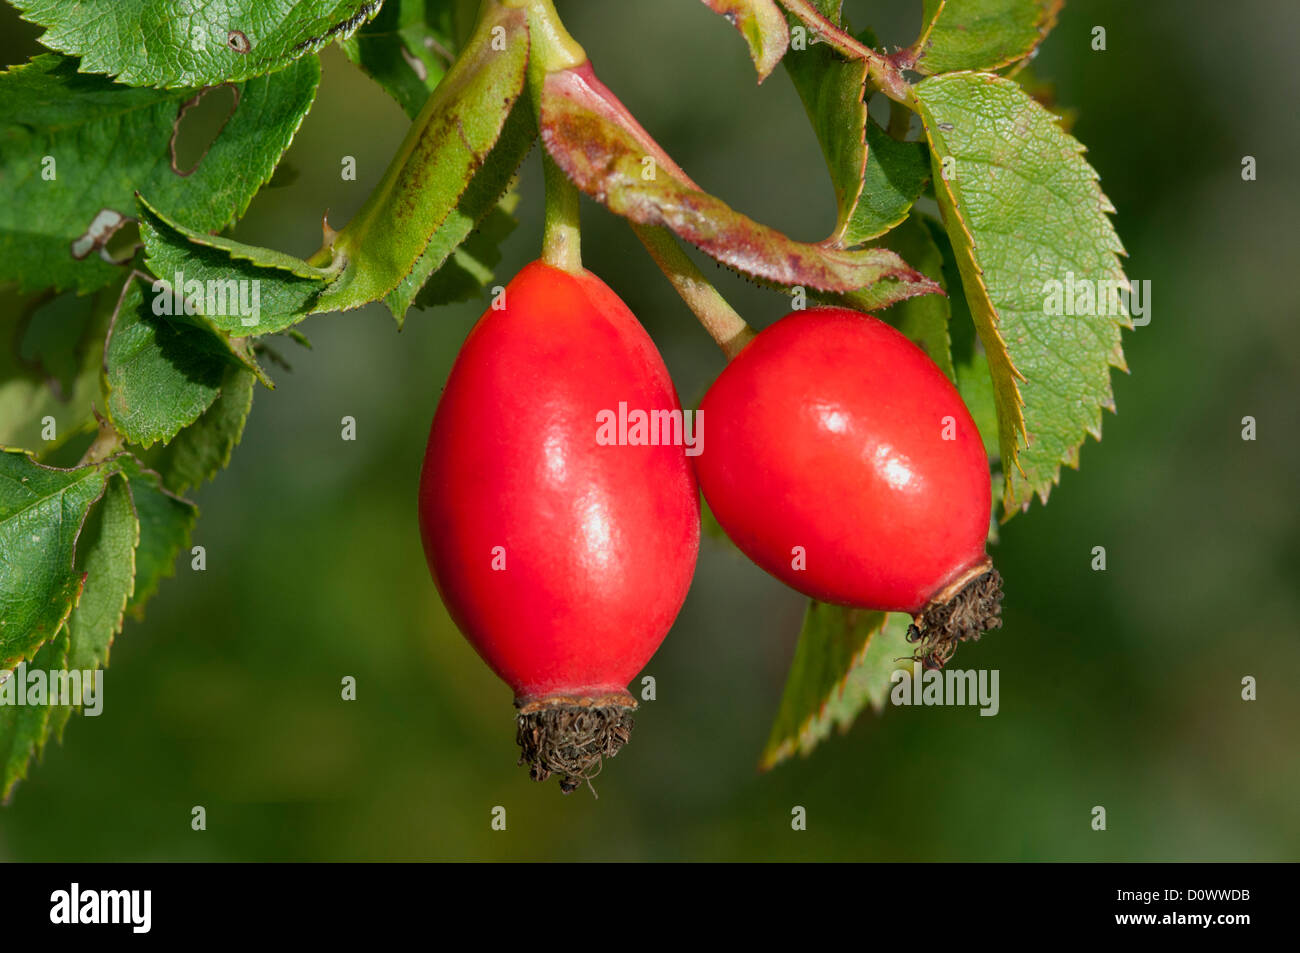 Rose hip fruits of Dog rose (Rosa canina), Rose family (Rosaceae), Alsace, France Stock Photo